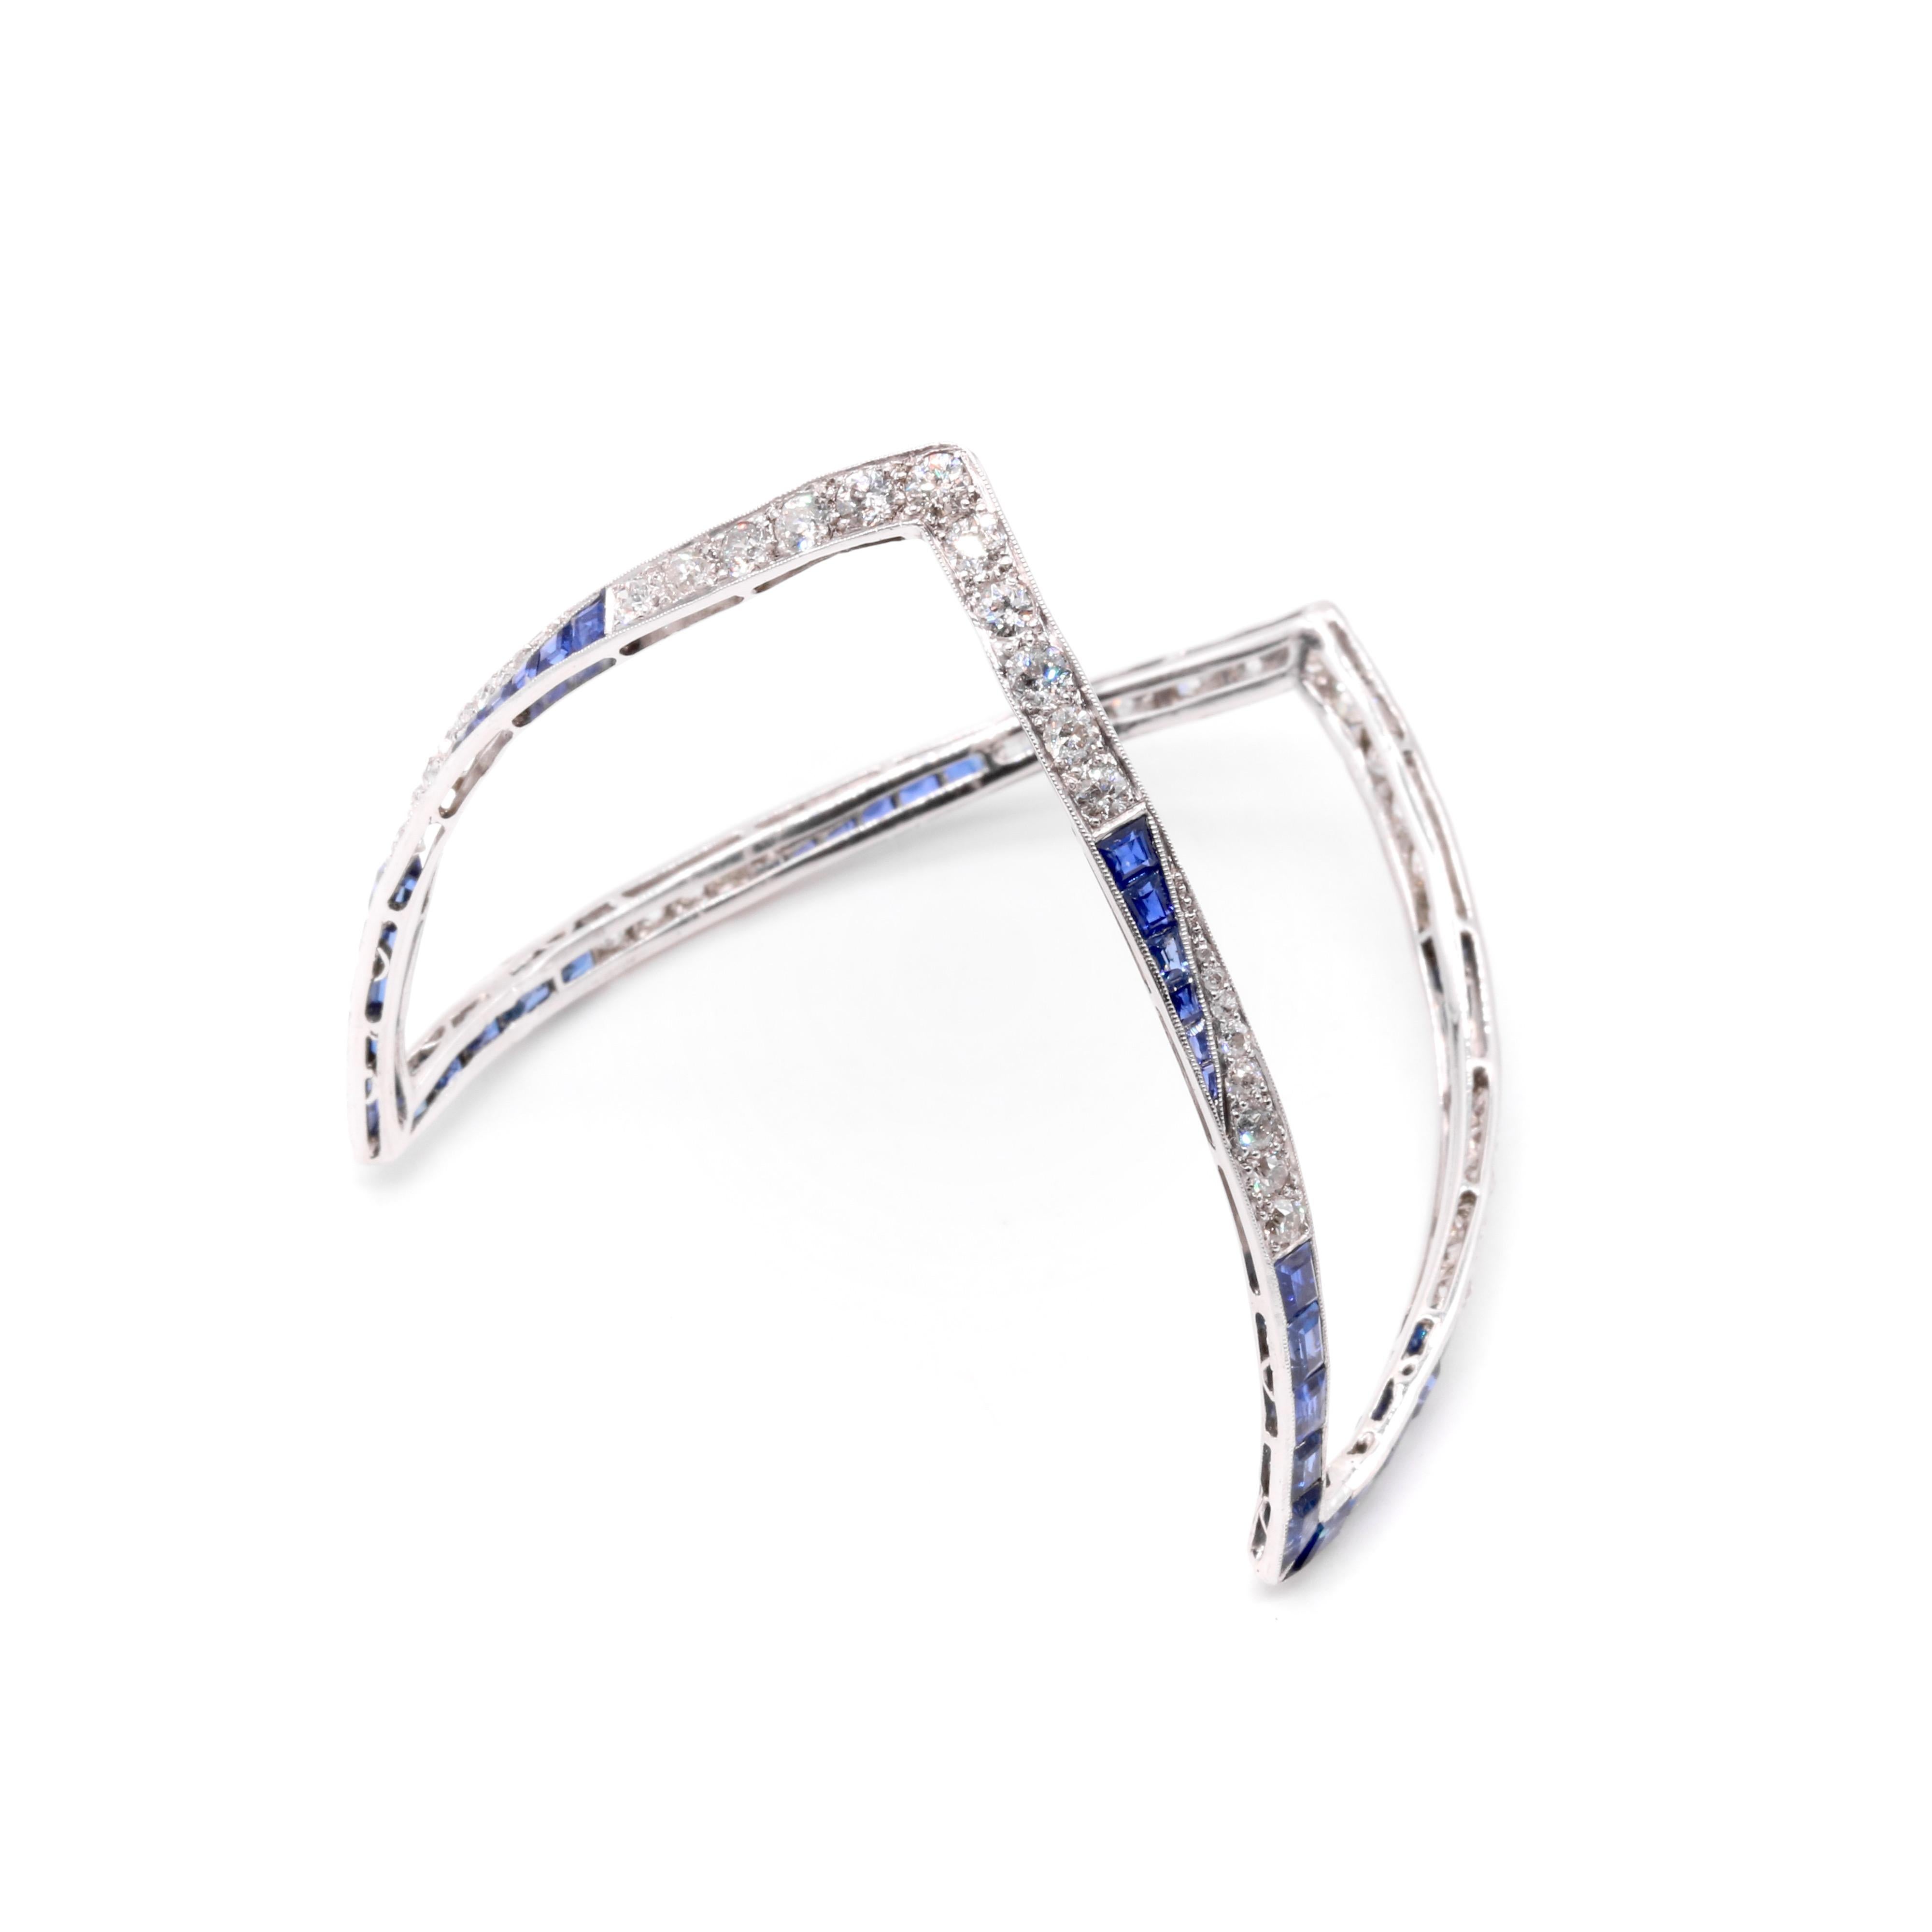 An Art Deco diamond, sapphire, and platinum bangle, comprising fifty-four round cut diamonds, and forty-four calibre cut blue sapphires, set in platinum. 

This astonishing Art Deco bangle is like nothing I have ever seen. Set with diamonds and